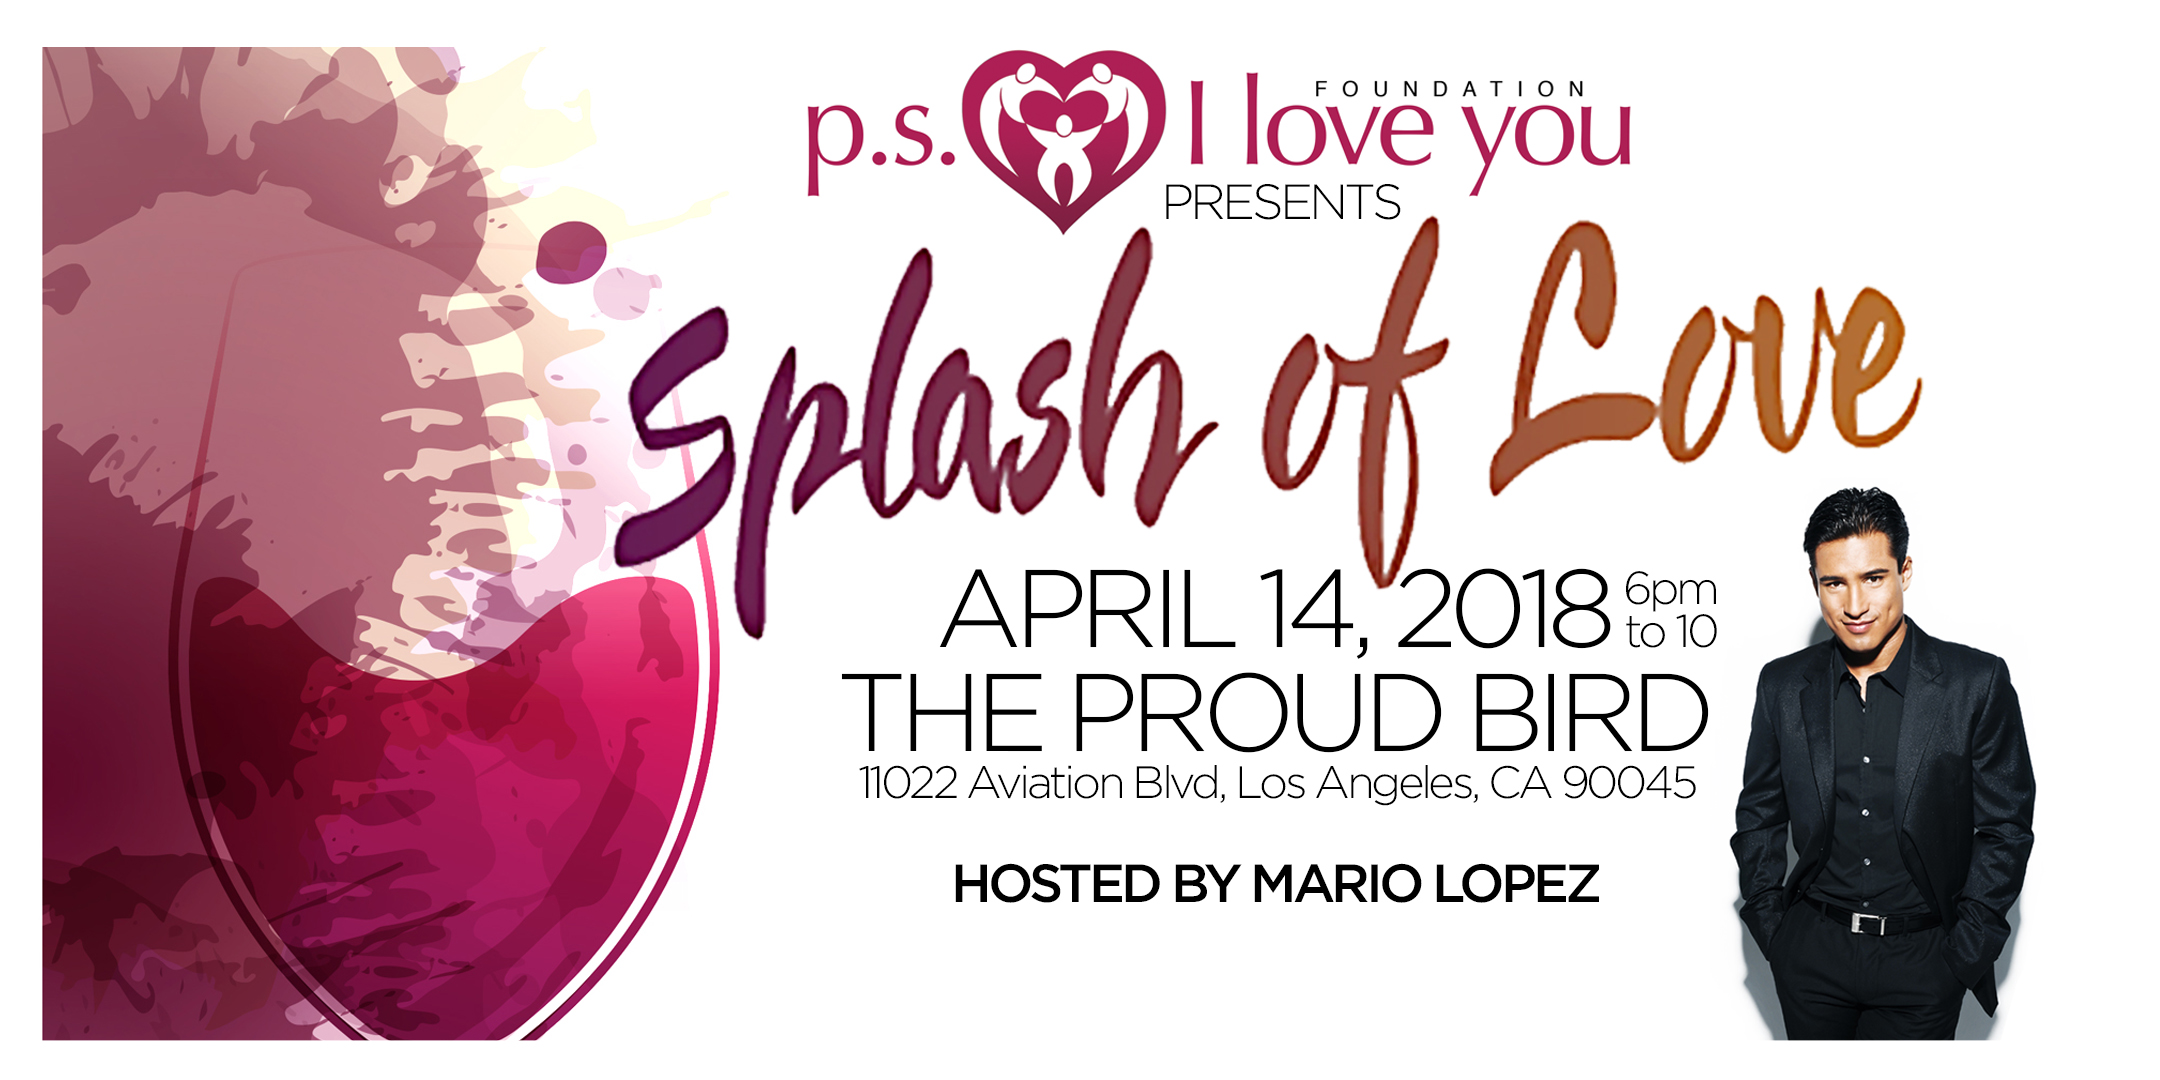 Splash of Love Hosted by Mario Lopez